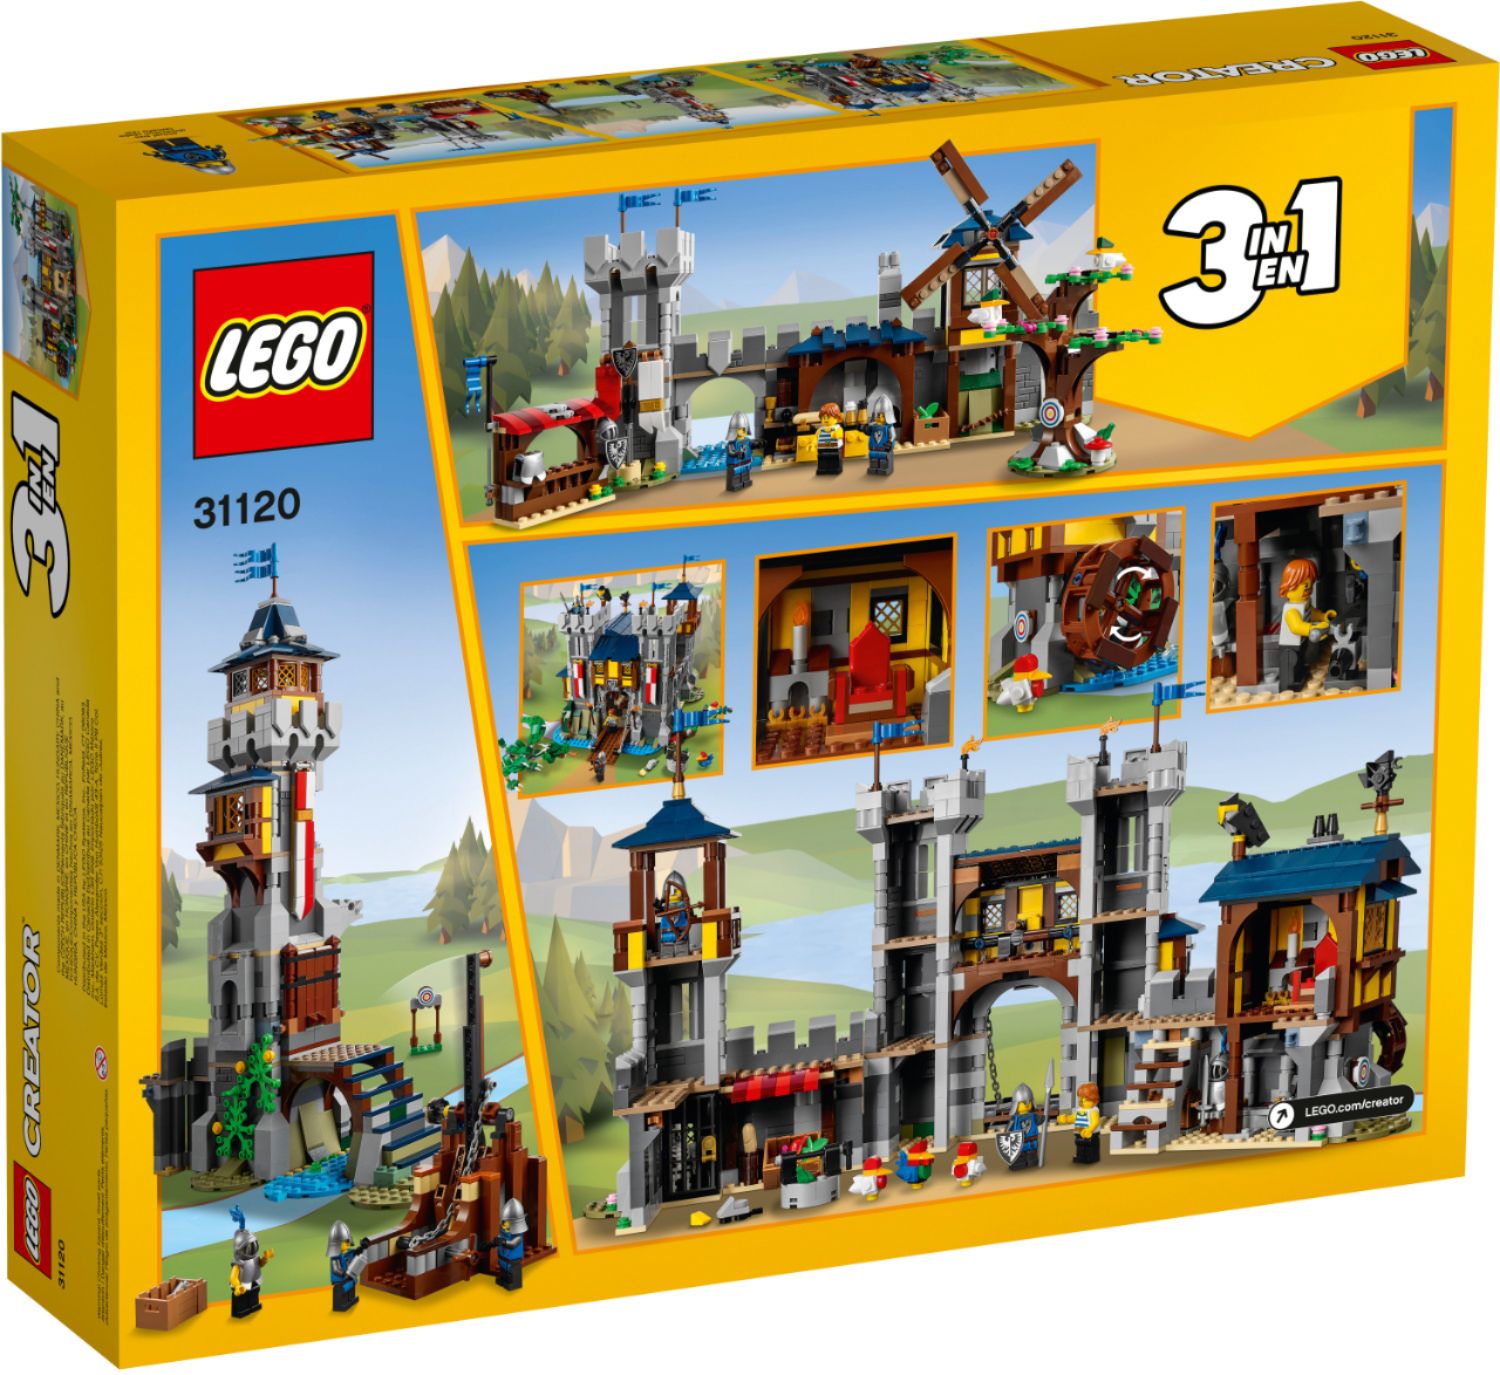 LEGO® Creator 3-in-1 review: 31120 Medieval Castle